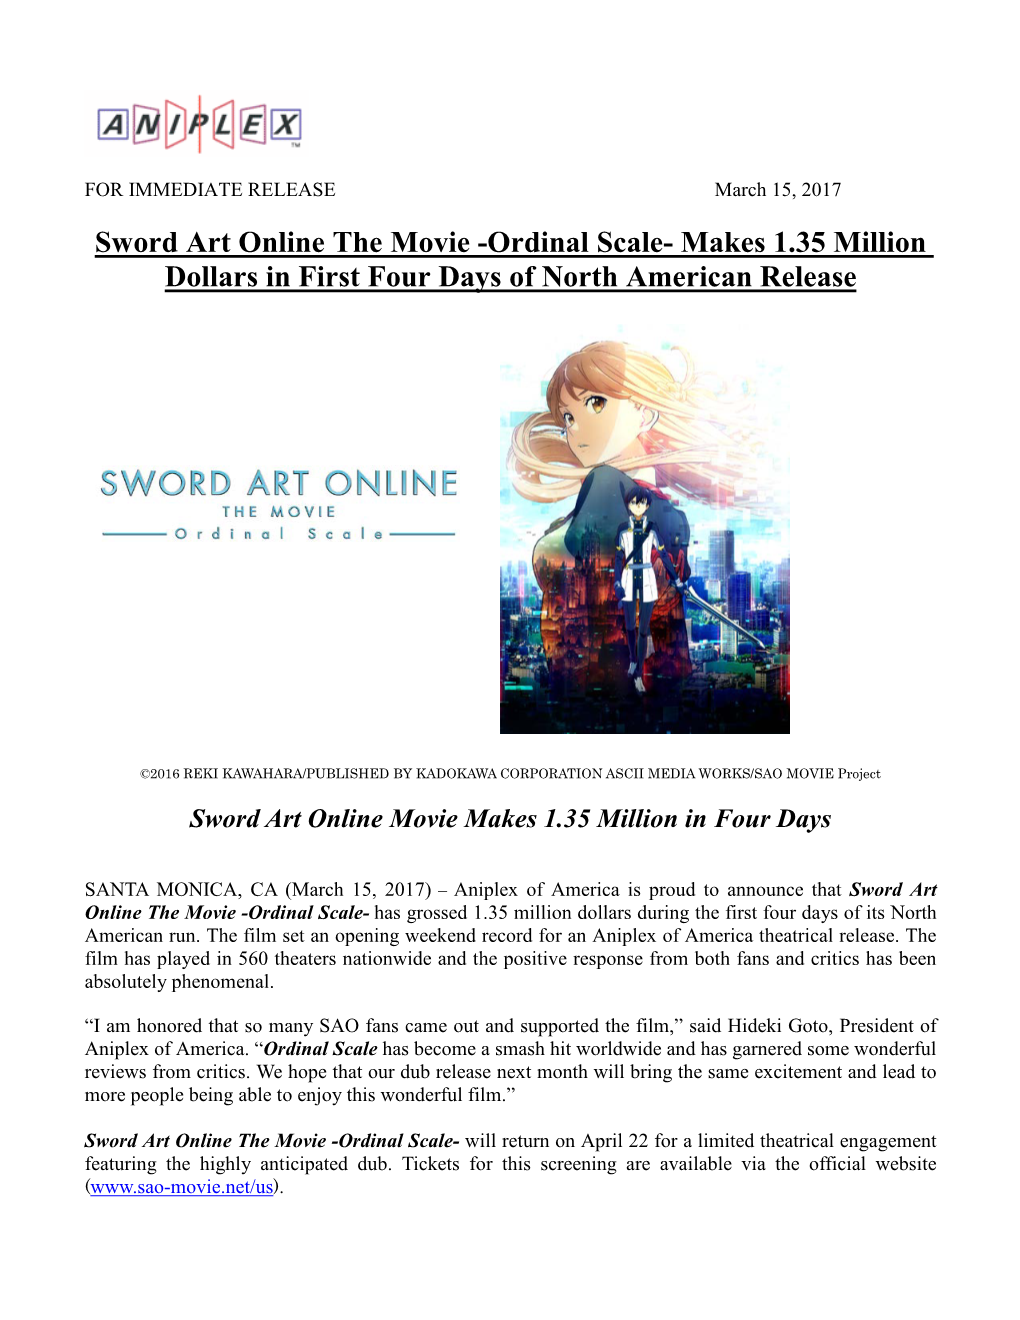 Ordinal Scale- Makes 1.35 Million Dollars in First Four Days of North American Release